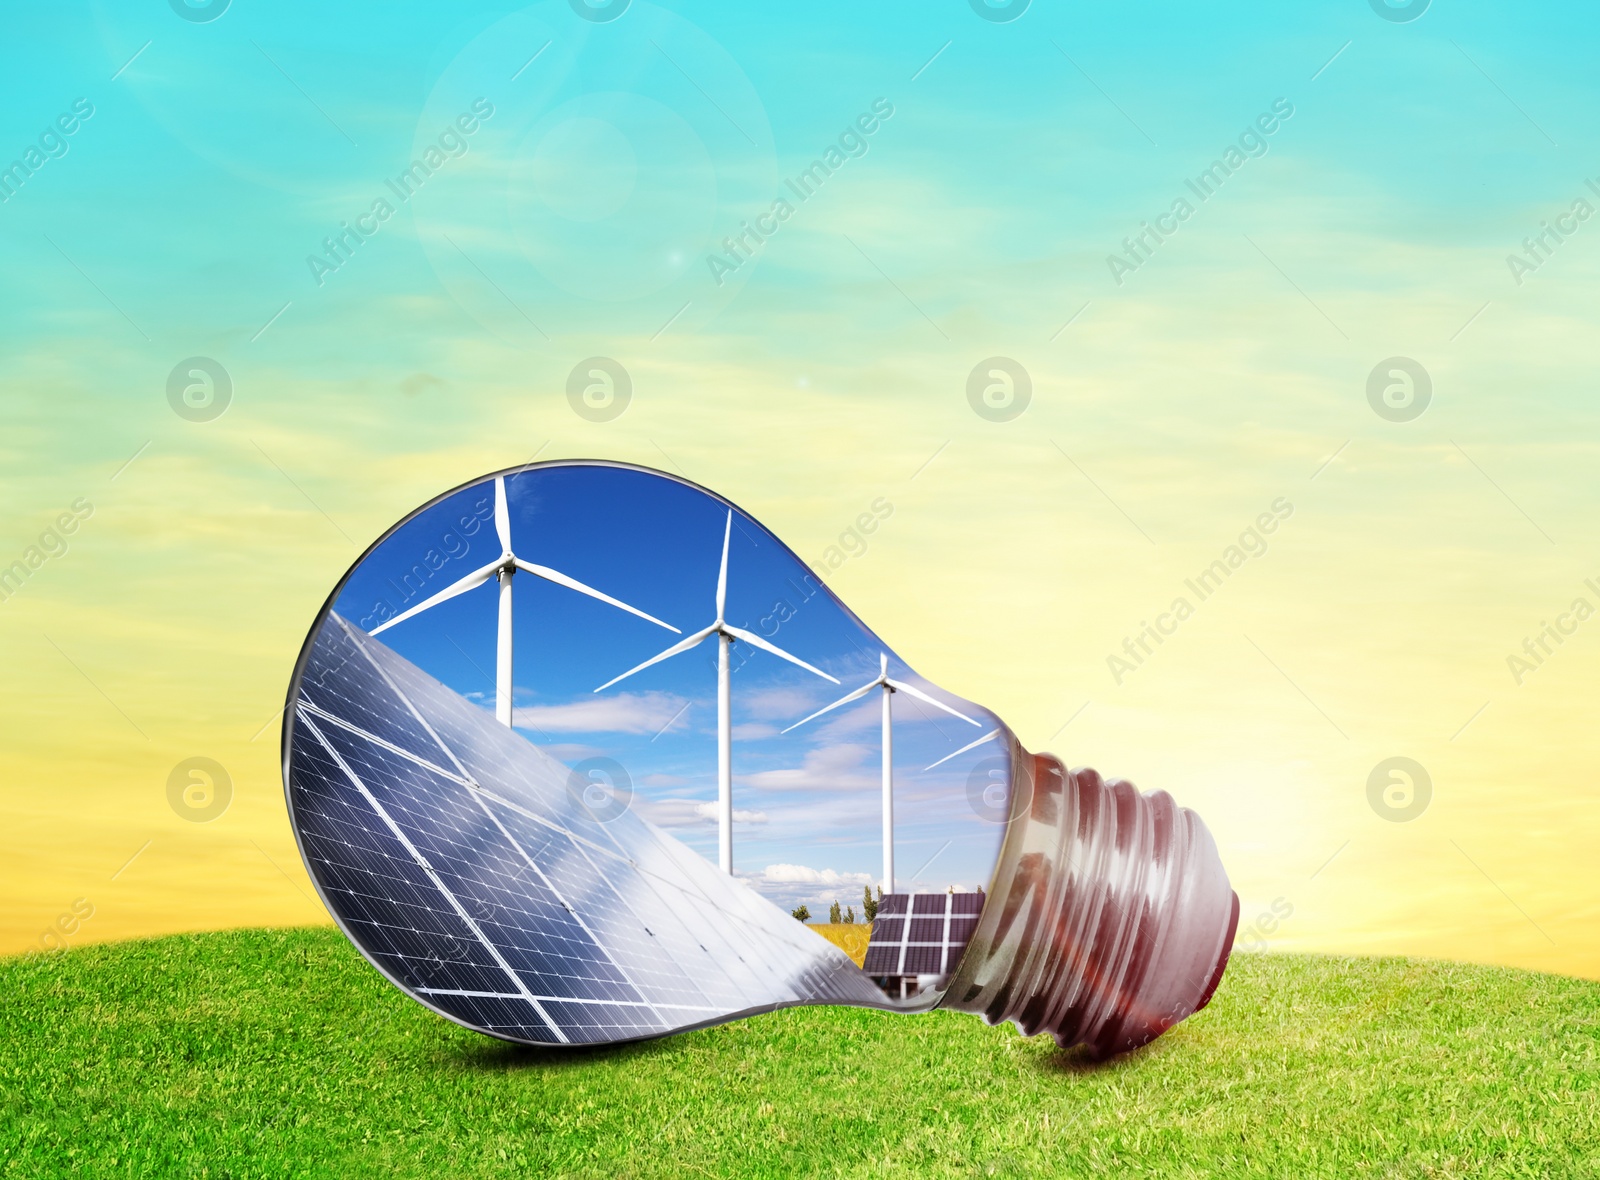 Image of Alternative energy source. Light bulb with solar panels and wind turbines outdoors